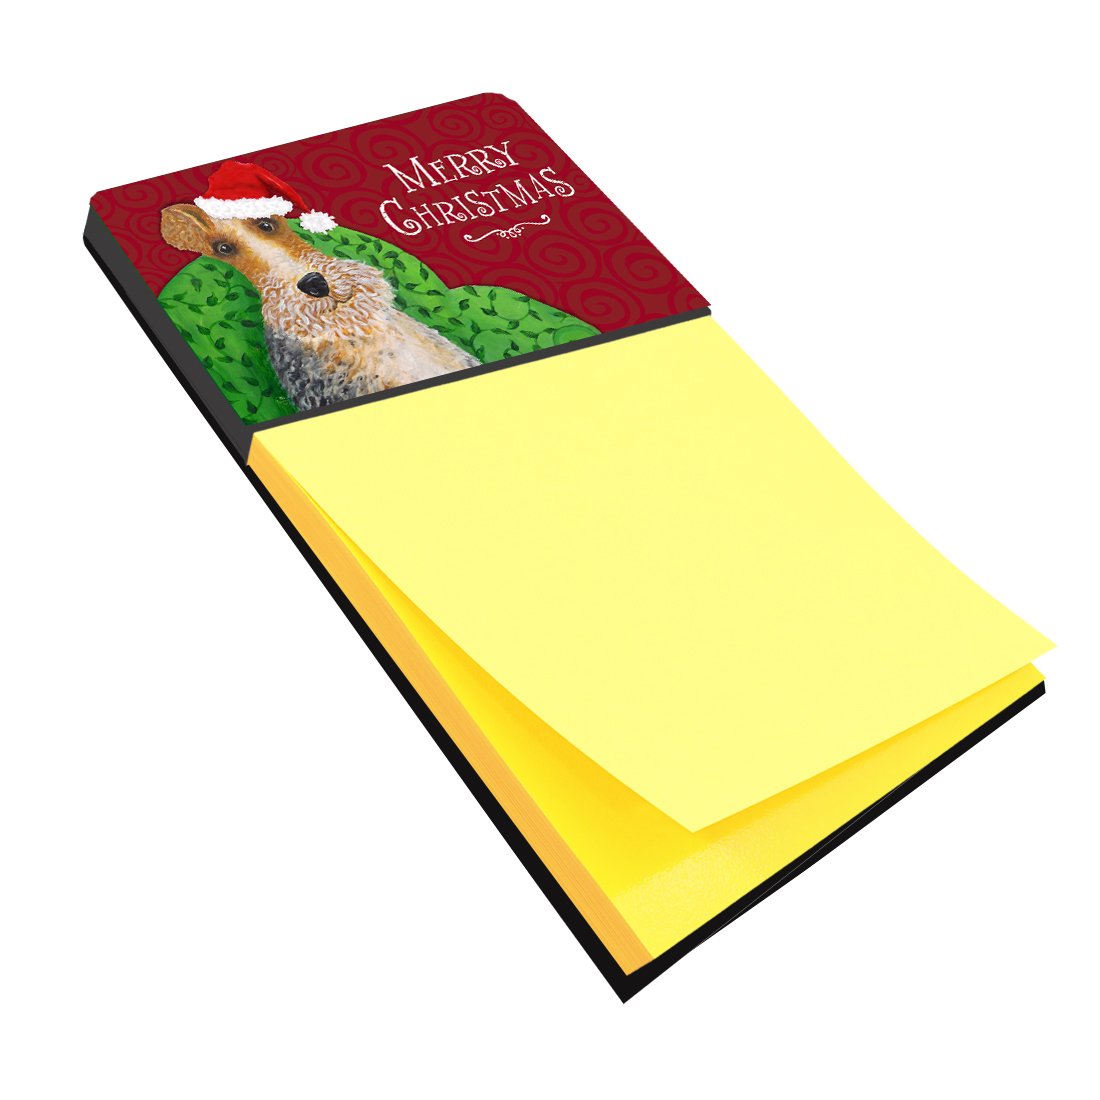 Wire Fox Terrier Christmas Sticky Note Holder VHA3040SN by Caroline's Treasures